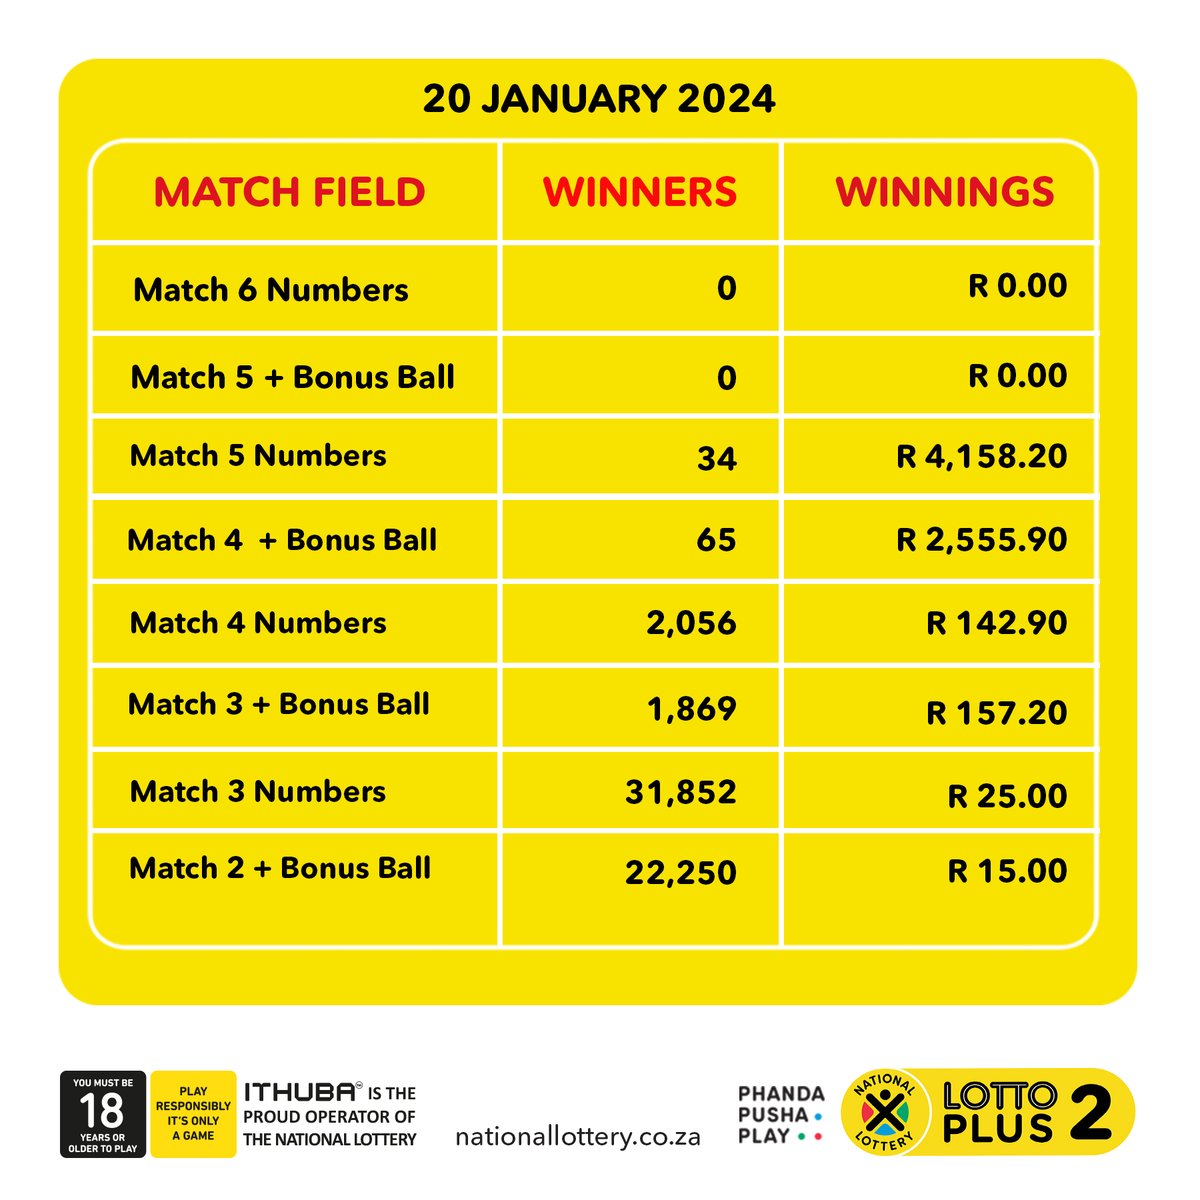 Here are #dividends for the #LOTTOPLUS 2 draw on (20/01/24)! You have another chance to win the rollover jackpot!